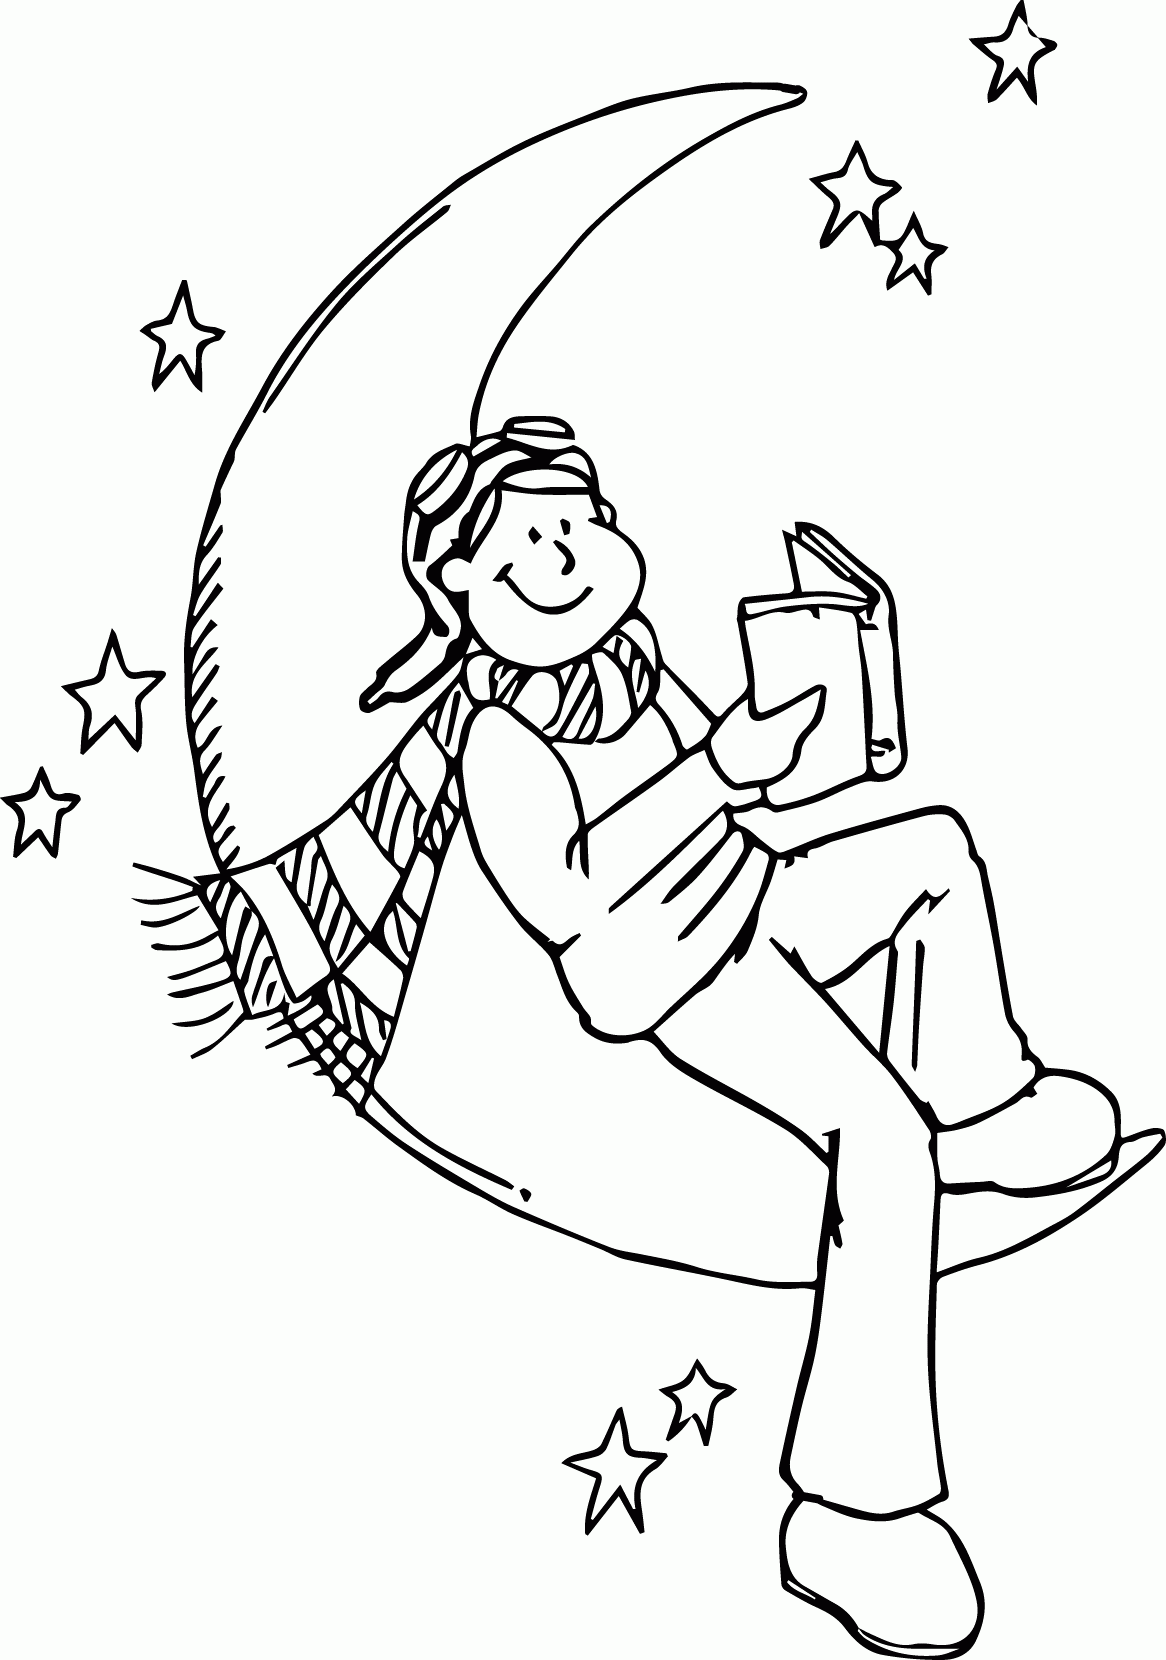 Children Read Book At The Moon Coloring Page | Wecoloringpage